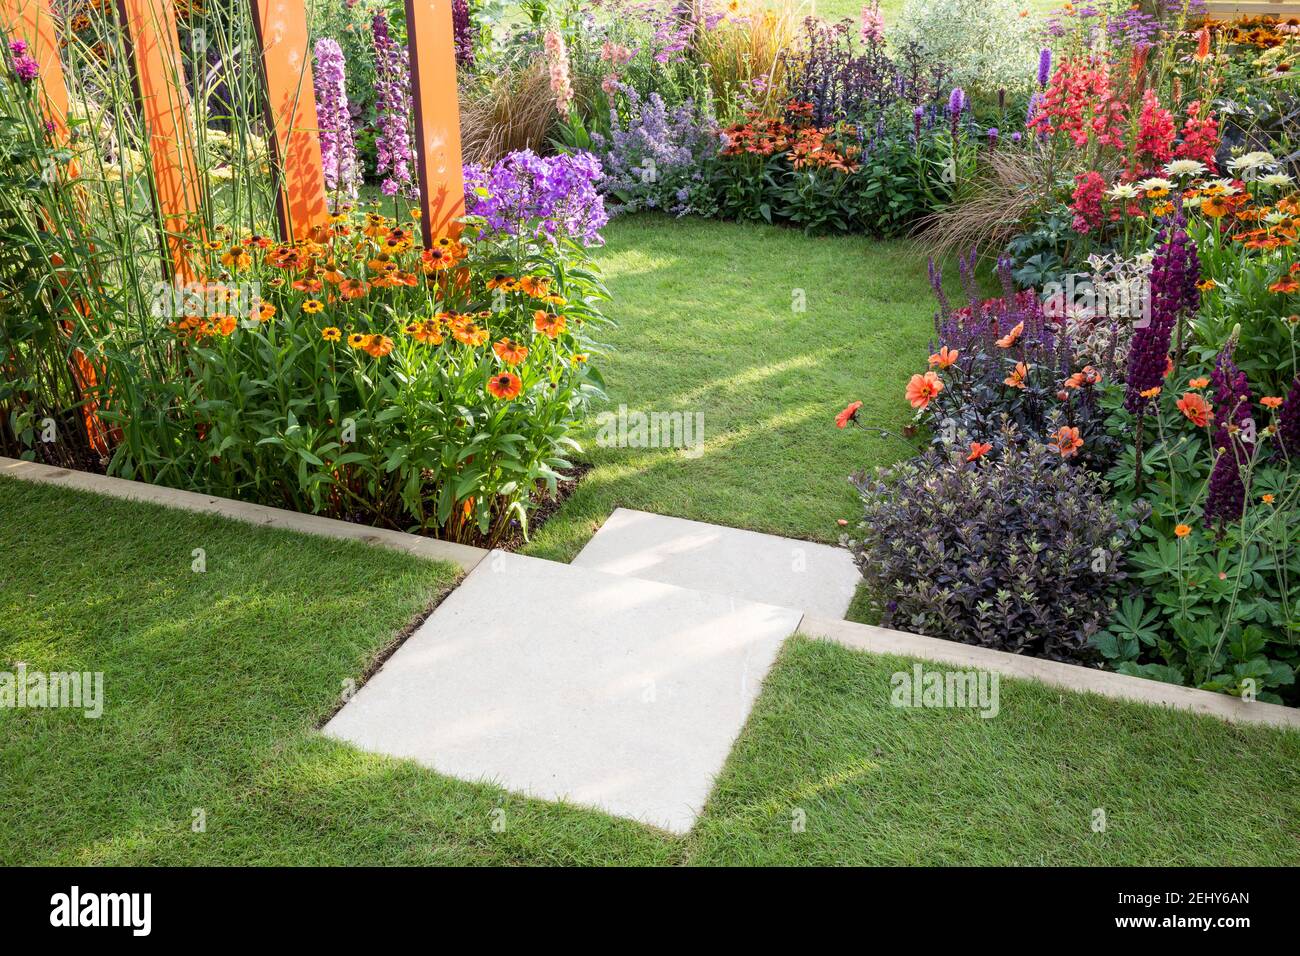 A small size garden - stone steps leading to a lawn grass area with flowerbeds filled with flowers plants including Helenium - Dahlias England GB UK Stock Photo